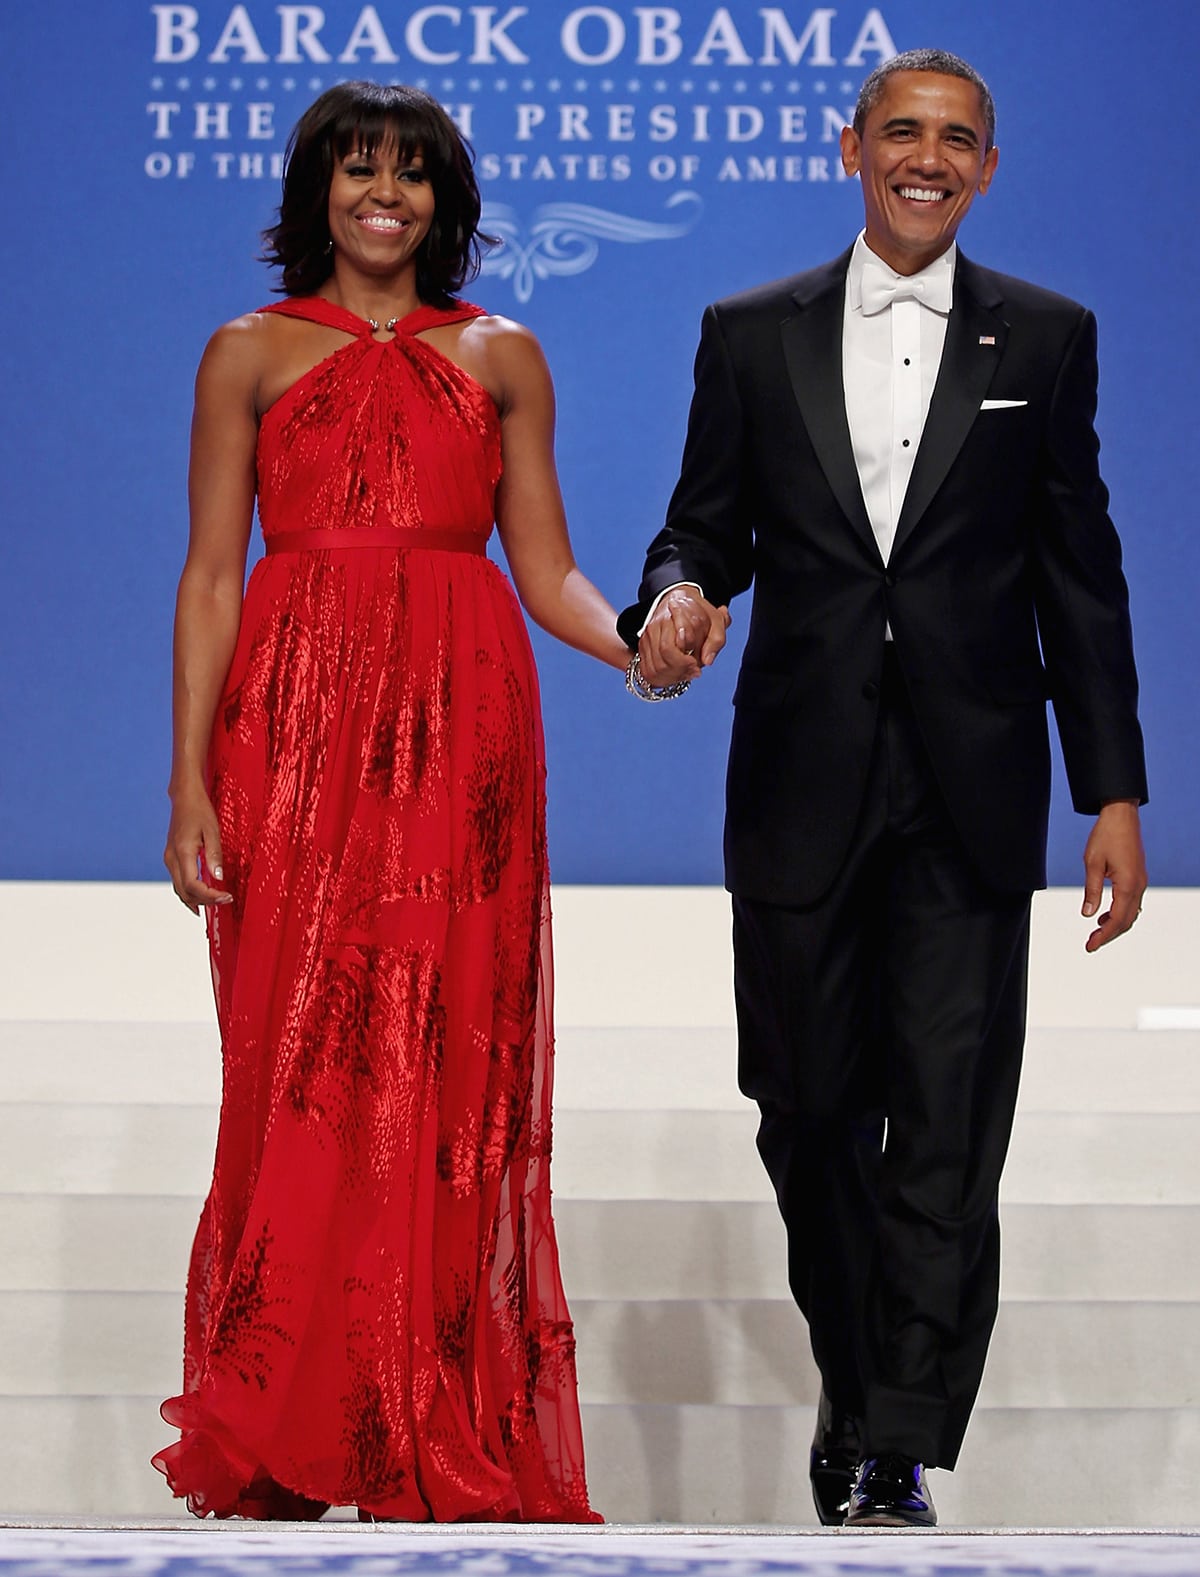 Michelle Obama arriving at the 2013 Inaugural Ball in a red Jason Wu gown with her husband Barack Obama held at the Walter Washington Convention Center on January 21, 2013